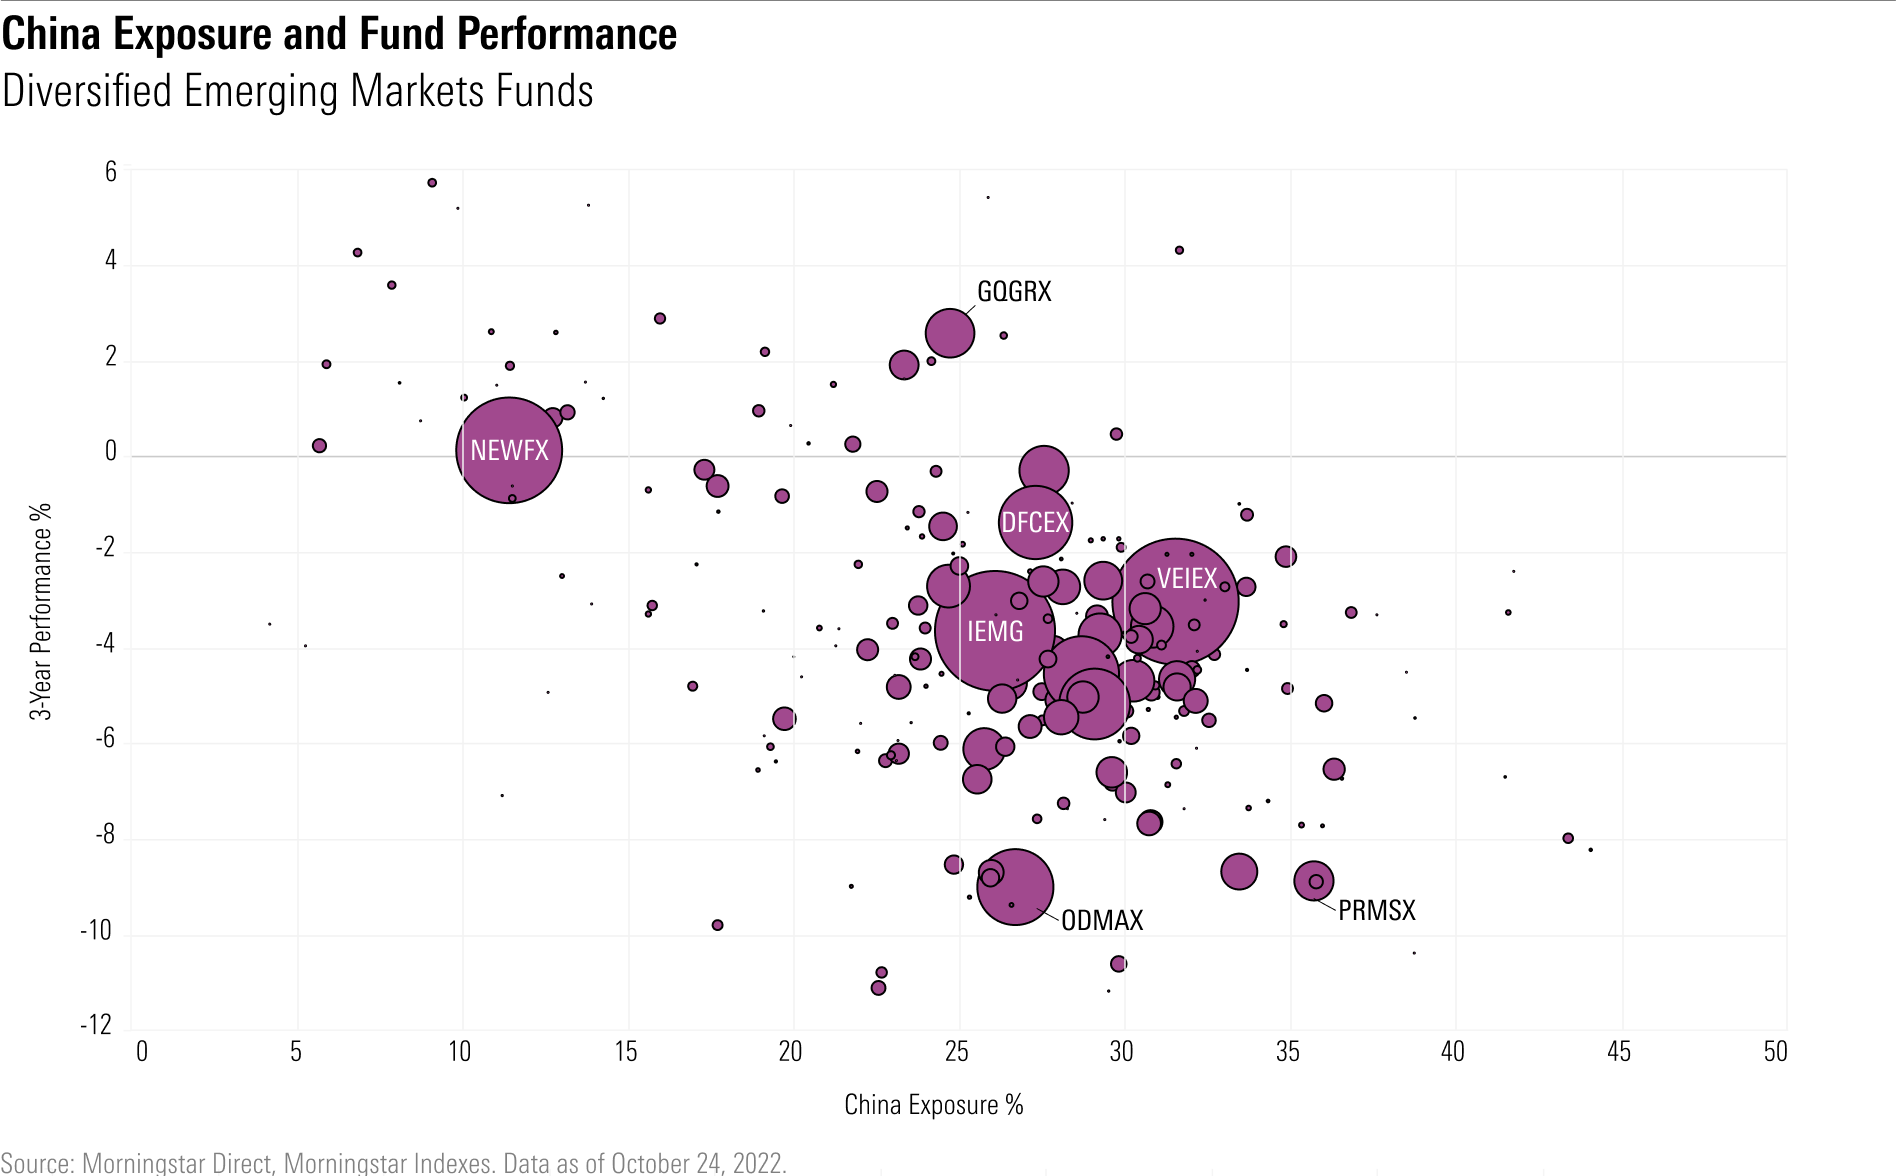 Bubble plot showing diversified emerging markets funds, their exposure to China stocks and their trailing 3-year performance.